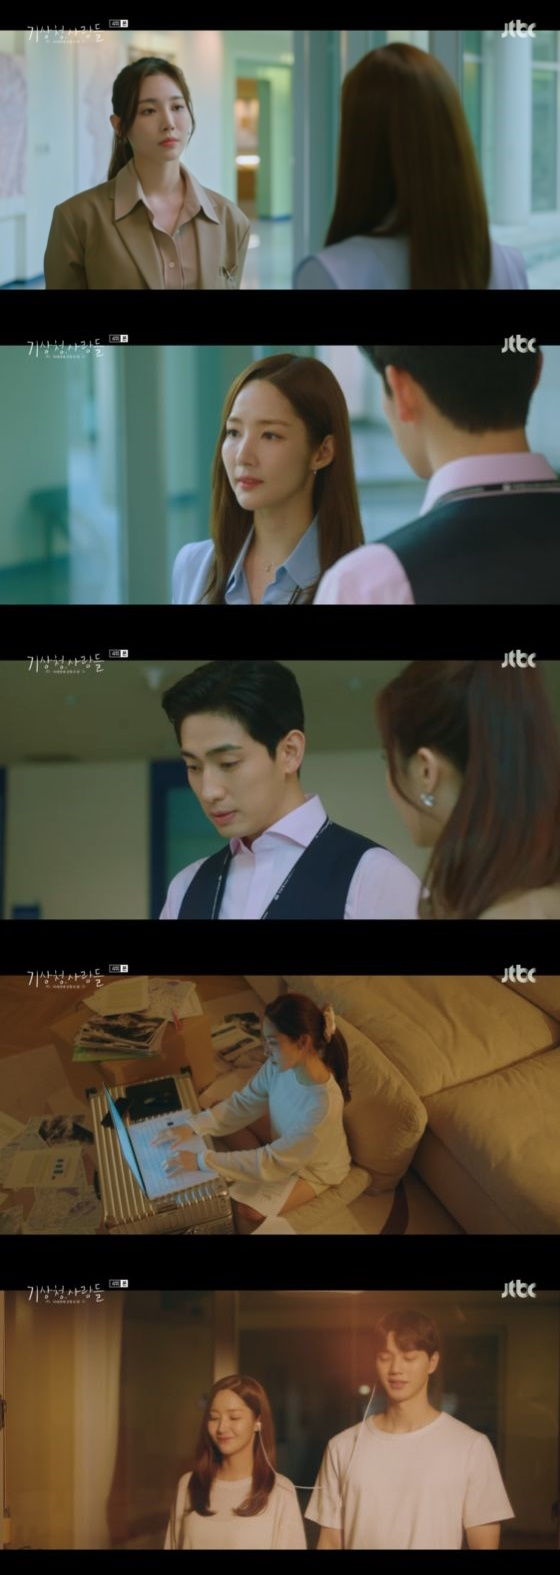 In the JTBC Saturday drama People in the Weather Service: A Cruelty of In-house Love, which aired on Tuesday afternoon, Jin Ha-kyung (Park Min-young) was portrayed after Lee Si-woos Confessions.Jin Ha-kyung said to Lee Si-woos straight-line Confessions, The general manager and the special officer are the boss and subordinates in the Meteorological Agency.When Lee Si-woo caught up again, Jin Ha Kyung refused, saying, Do you want me to do it again?Lee Si-woo persuaded Jin Ha-kyung, saying, You were shaken by me. He apologized to Jin Ha-kyung, who apologized to him, I do not apologize. I will not be sorry that you were caught by the manager.Since Confessions, Jin Ha-gyeong and Lee Si-woo have been met with differences in opinion in their work.General team staff suspected Lee Si-woos girlfriend was inside the Met Office.But I did not think that he was Jin Ha Kyung, and rather I thought Lee Si-woo was a bad boy for Jin Ha Kyung.Jin Ha-kyung was worried about the text to Lee Si-woo after work, and smiled while watching profile photos.Then suddenly the video call button was pressed, and Jin Ha-kyung tried to hide his embarrassment and gave Lee Si-woo a lot of work. Lee Si-woo said, Why are you so badly drawn?I wondered about Jin Ha-gyeongs attitude.Jin Ha-kyung said, It is not effective and it is difficult to secure equipment with the current budget. However, Chae Yoo-jin said, So it is due to lack of budget and lack of equipment.I do not do it, he said, asking provocative questions and writing an article that snipers the incompetence of the Meteorological Agency.Jin Ha-kyung, who learned about it the next day, protested to Chae Yoo-jin, saying, The fact is distorted. Chae Yoo-jin said, What about it?I responded shamelessly, and Jin Ha-kyung suspected that he had deliberately revenged Han Ki-jun (Yoon Park) for his personal feelings, saying, Do you get a fact check from a close person? Jin Ha-gyeong used Lee Si-woos data to make the report.Then I called Lee Si-woo every five minutes, and Lee Si-woo eventually came to Jinha Kyungs house.On the other hand, Jin Ha-kyung, who received Lee Si-woos Confessions earlier, was drawn to kiss Lee Si-woo.Jin Ha Kyung and Lee Si-woo greeted the morning together and announced the start of a new in-house love.